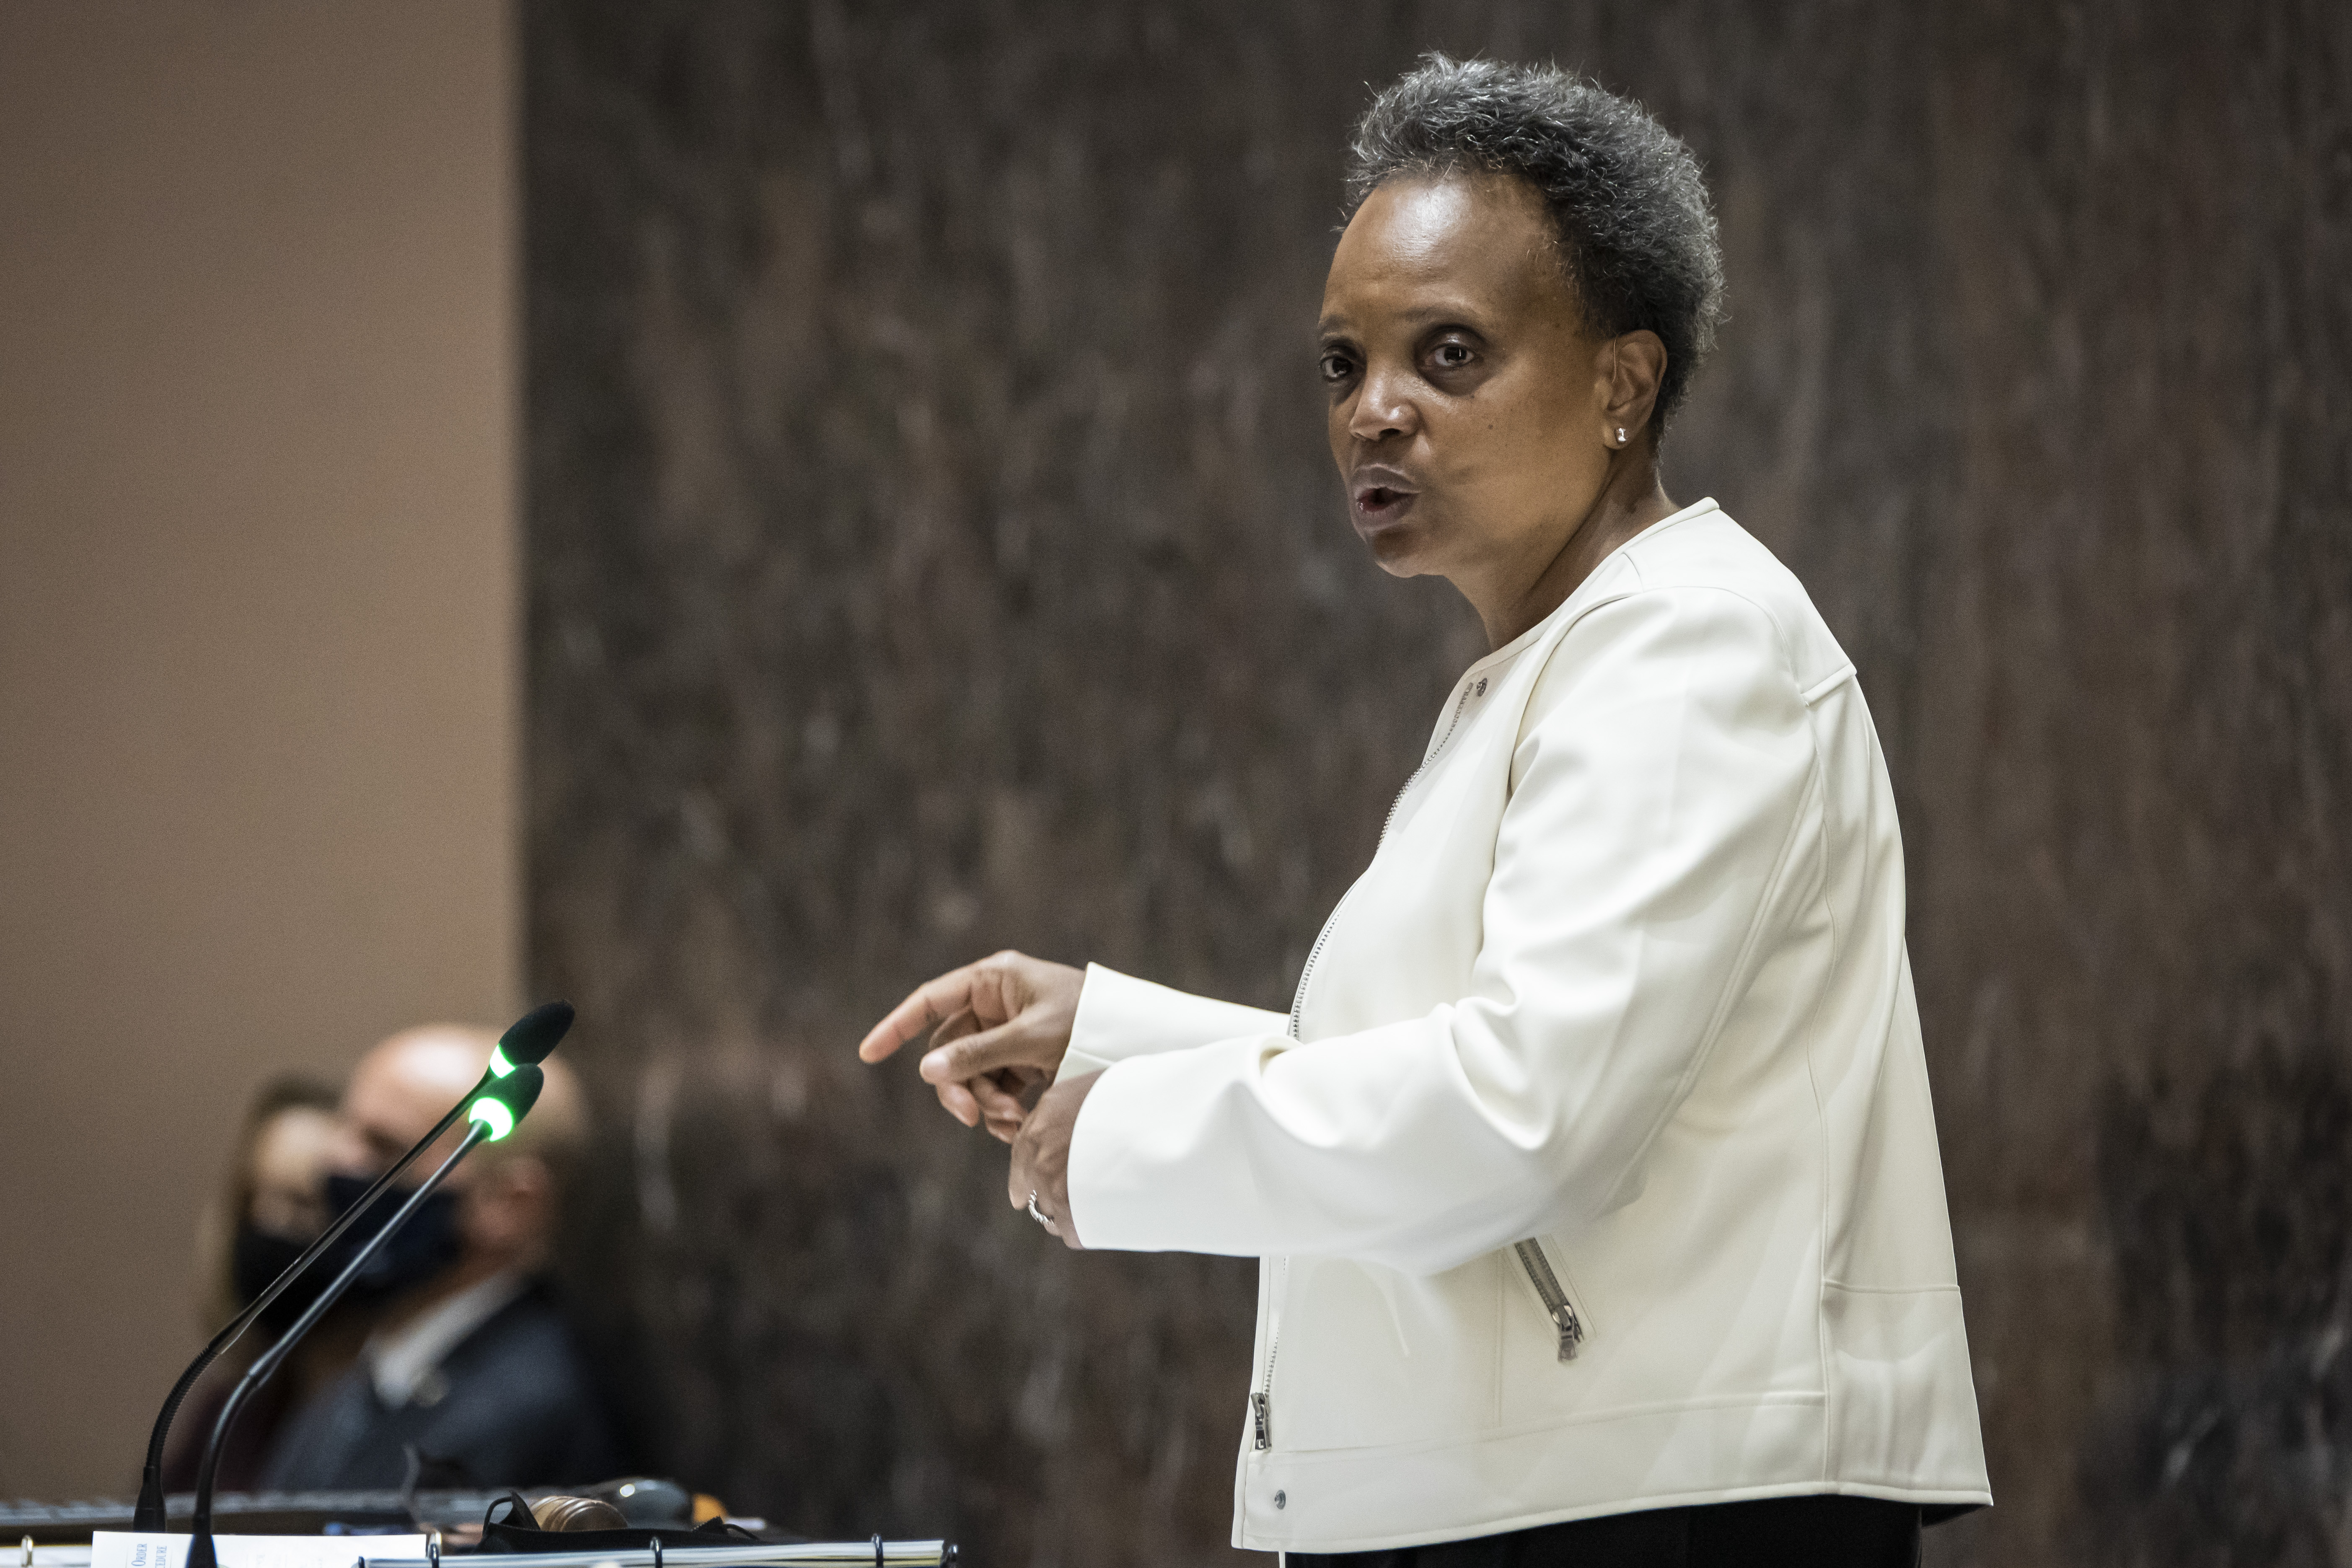 Mayor Lori Lightfoot presides over a Chicago City Council meeting on Dec. 15 at City Hall.